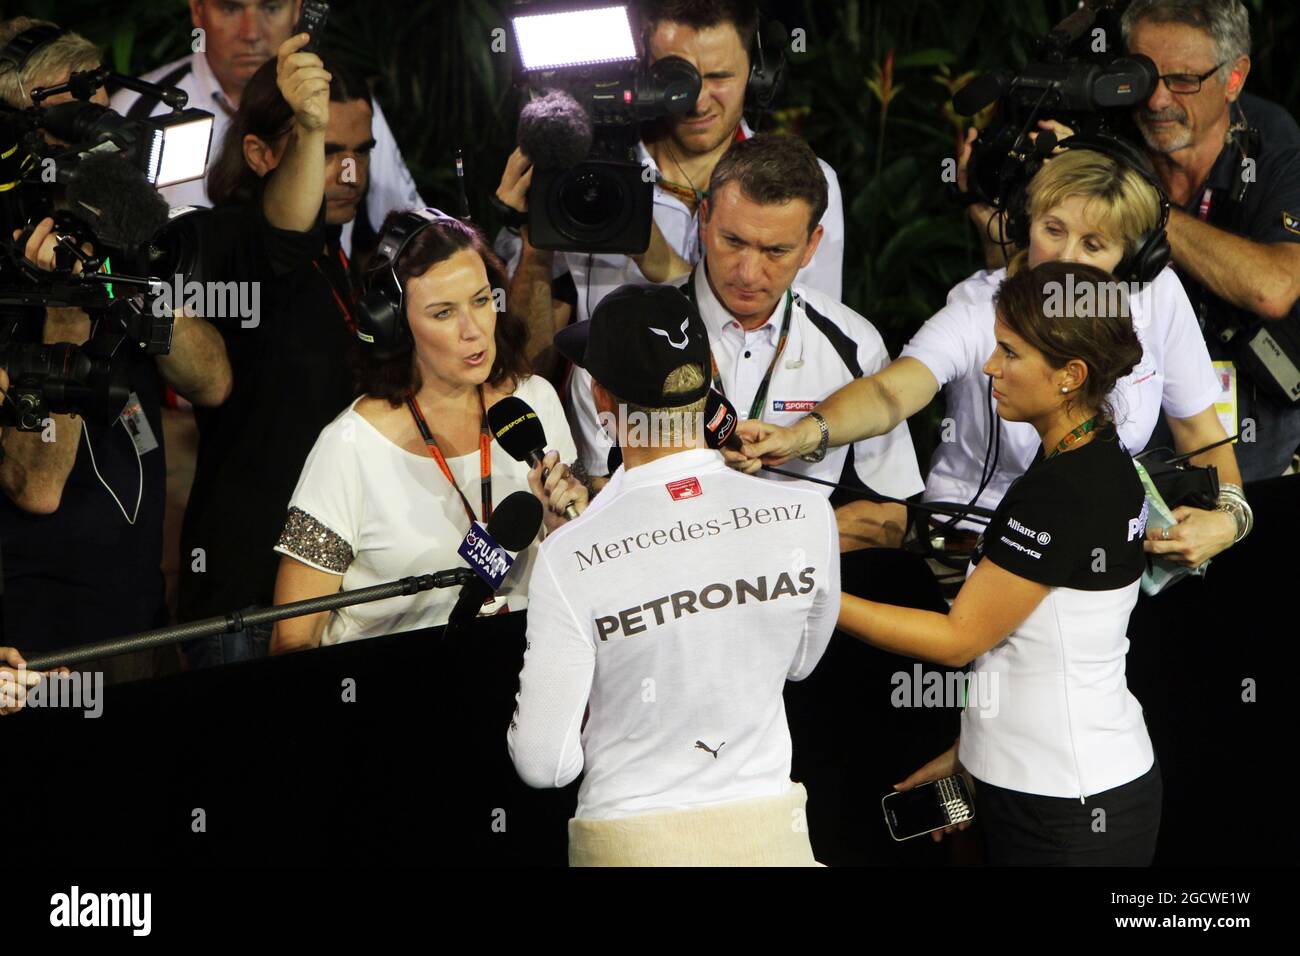 Lewis Hamilton (GBR) Mercedes AMG F1 with Lee McKenzie (GBR) BBC Television Reporter and Craig Slater (GBR) Sky F1 Reporter. Singapore Grand Prix, Saturday 19th September 2015. Marina Bay Street Circuit, Singapore. Stock Photo